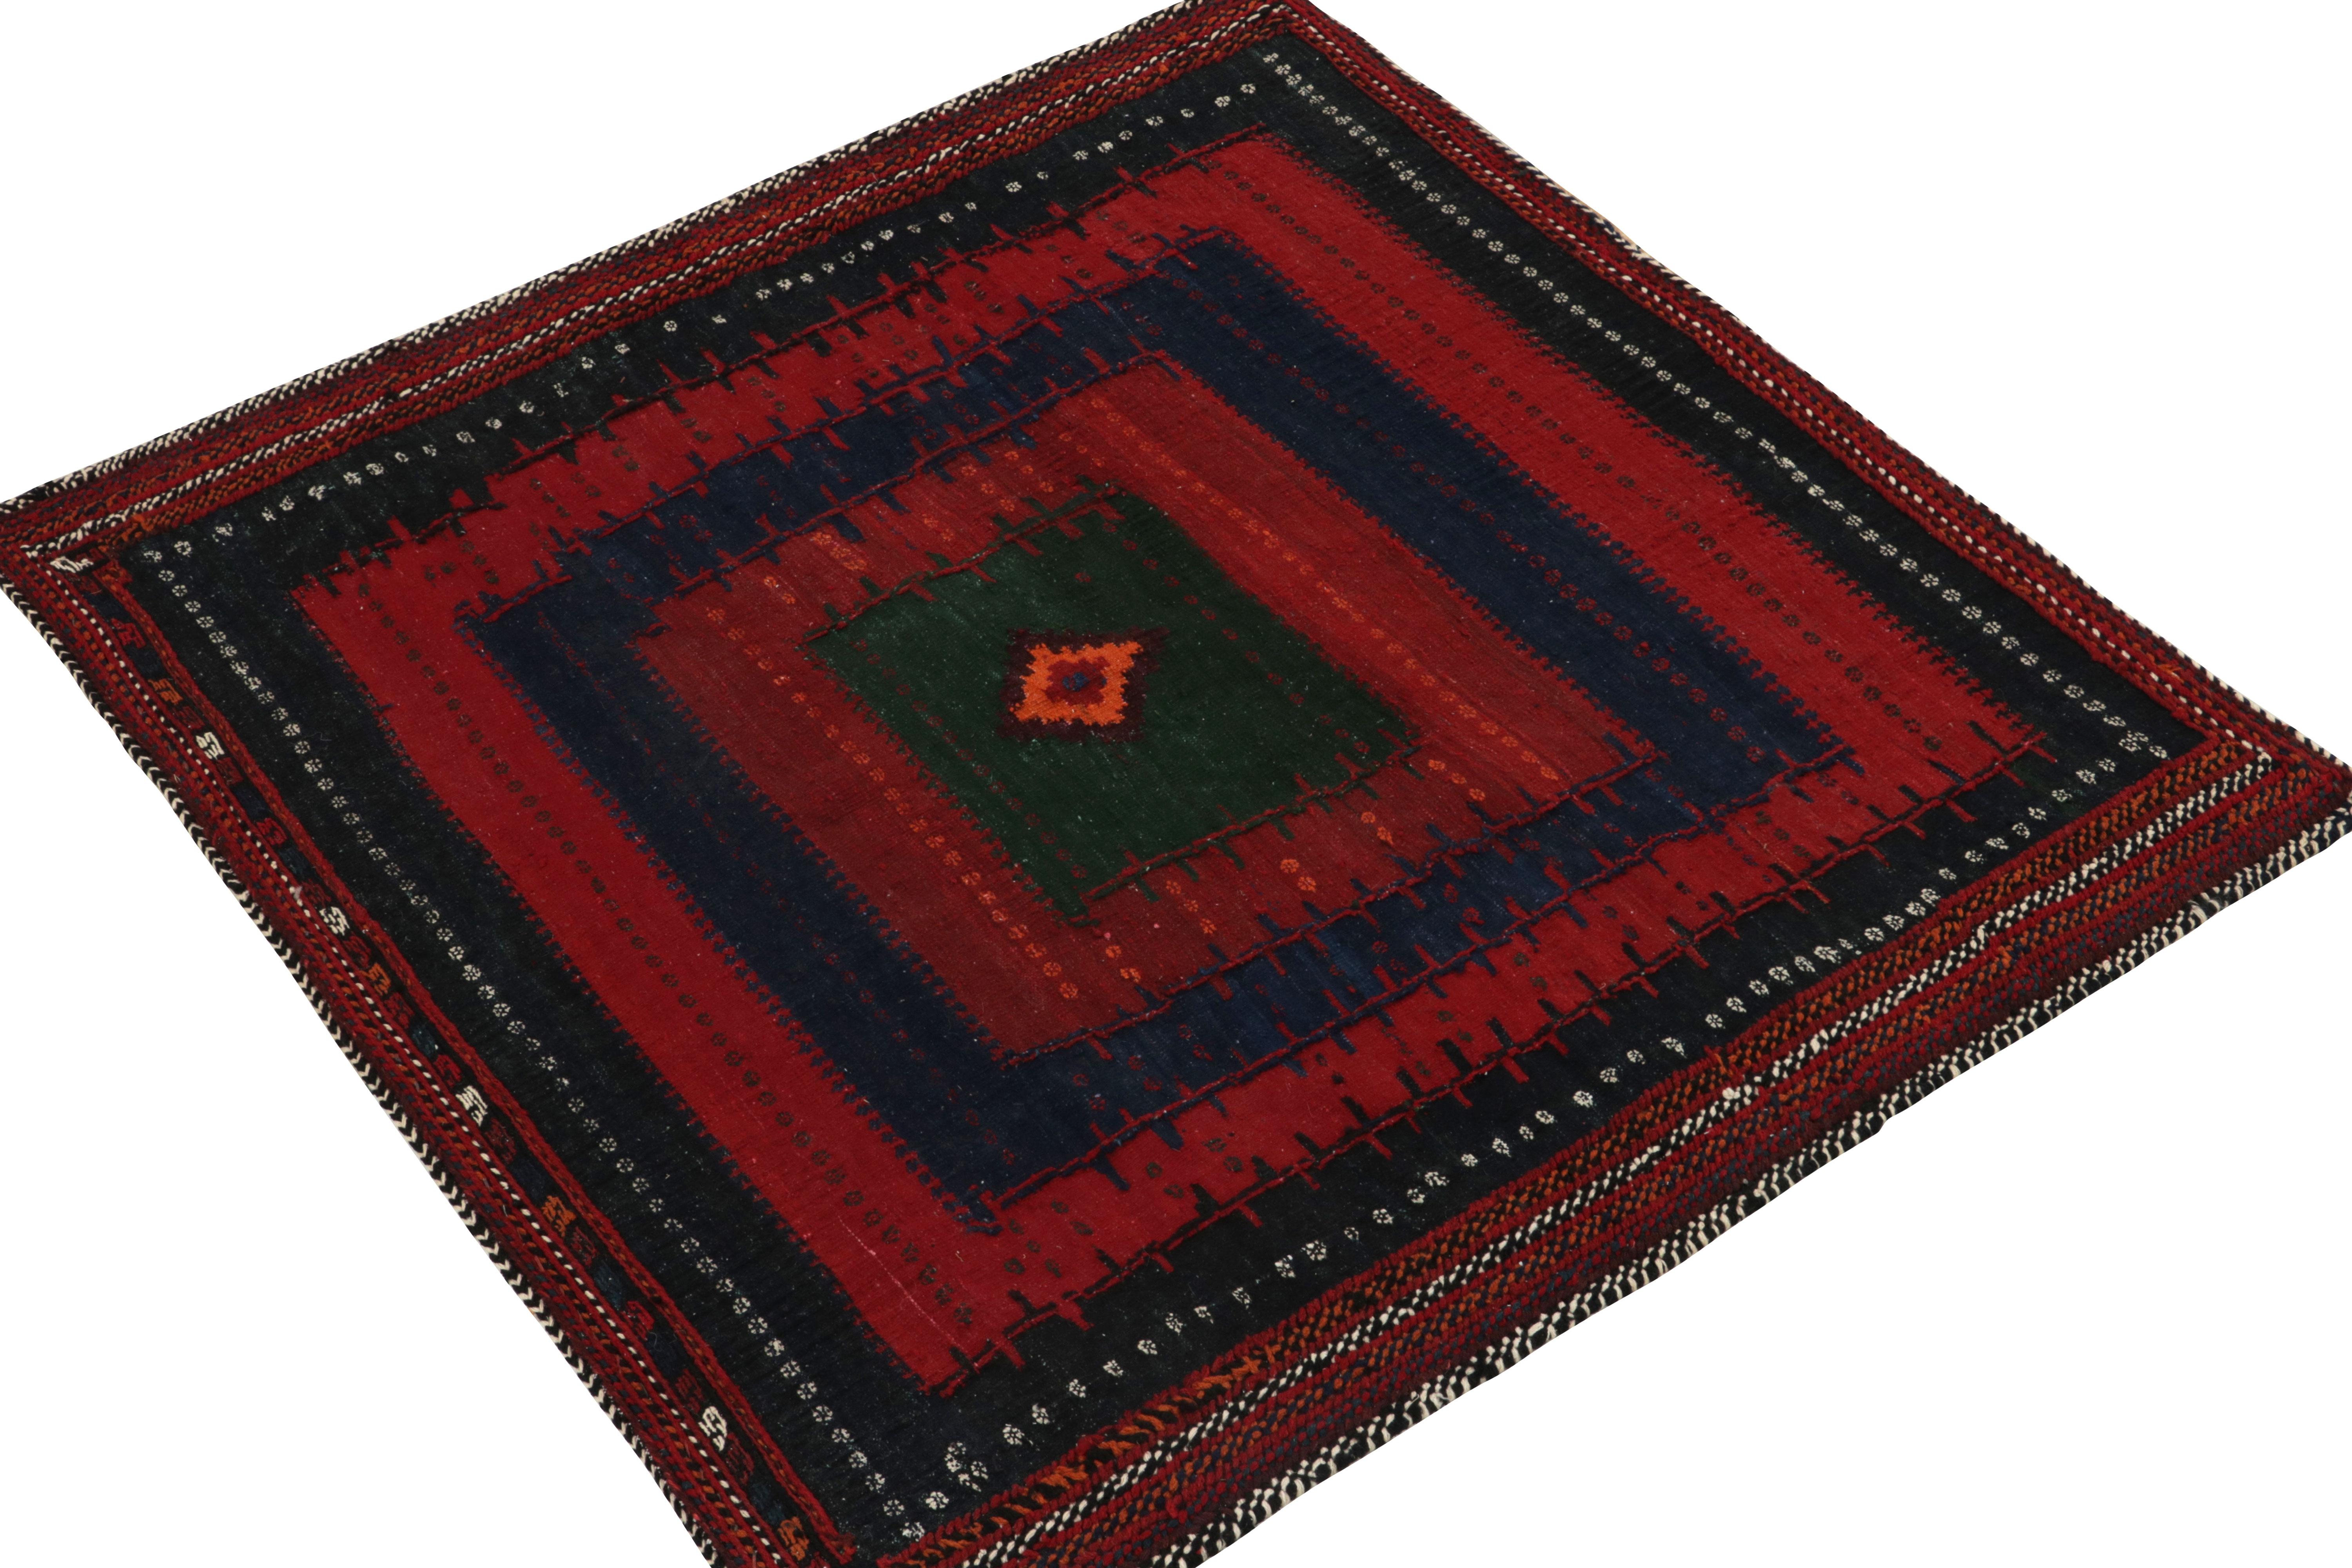 Connoting the celebrated tribal style, this 4x4 kilim rug hails from a special new curation of Persian Sofreh flat weaves. A distinguished lineage once woven for table and floor use alike, this square flat weave features an embroidered geometric